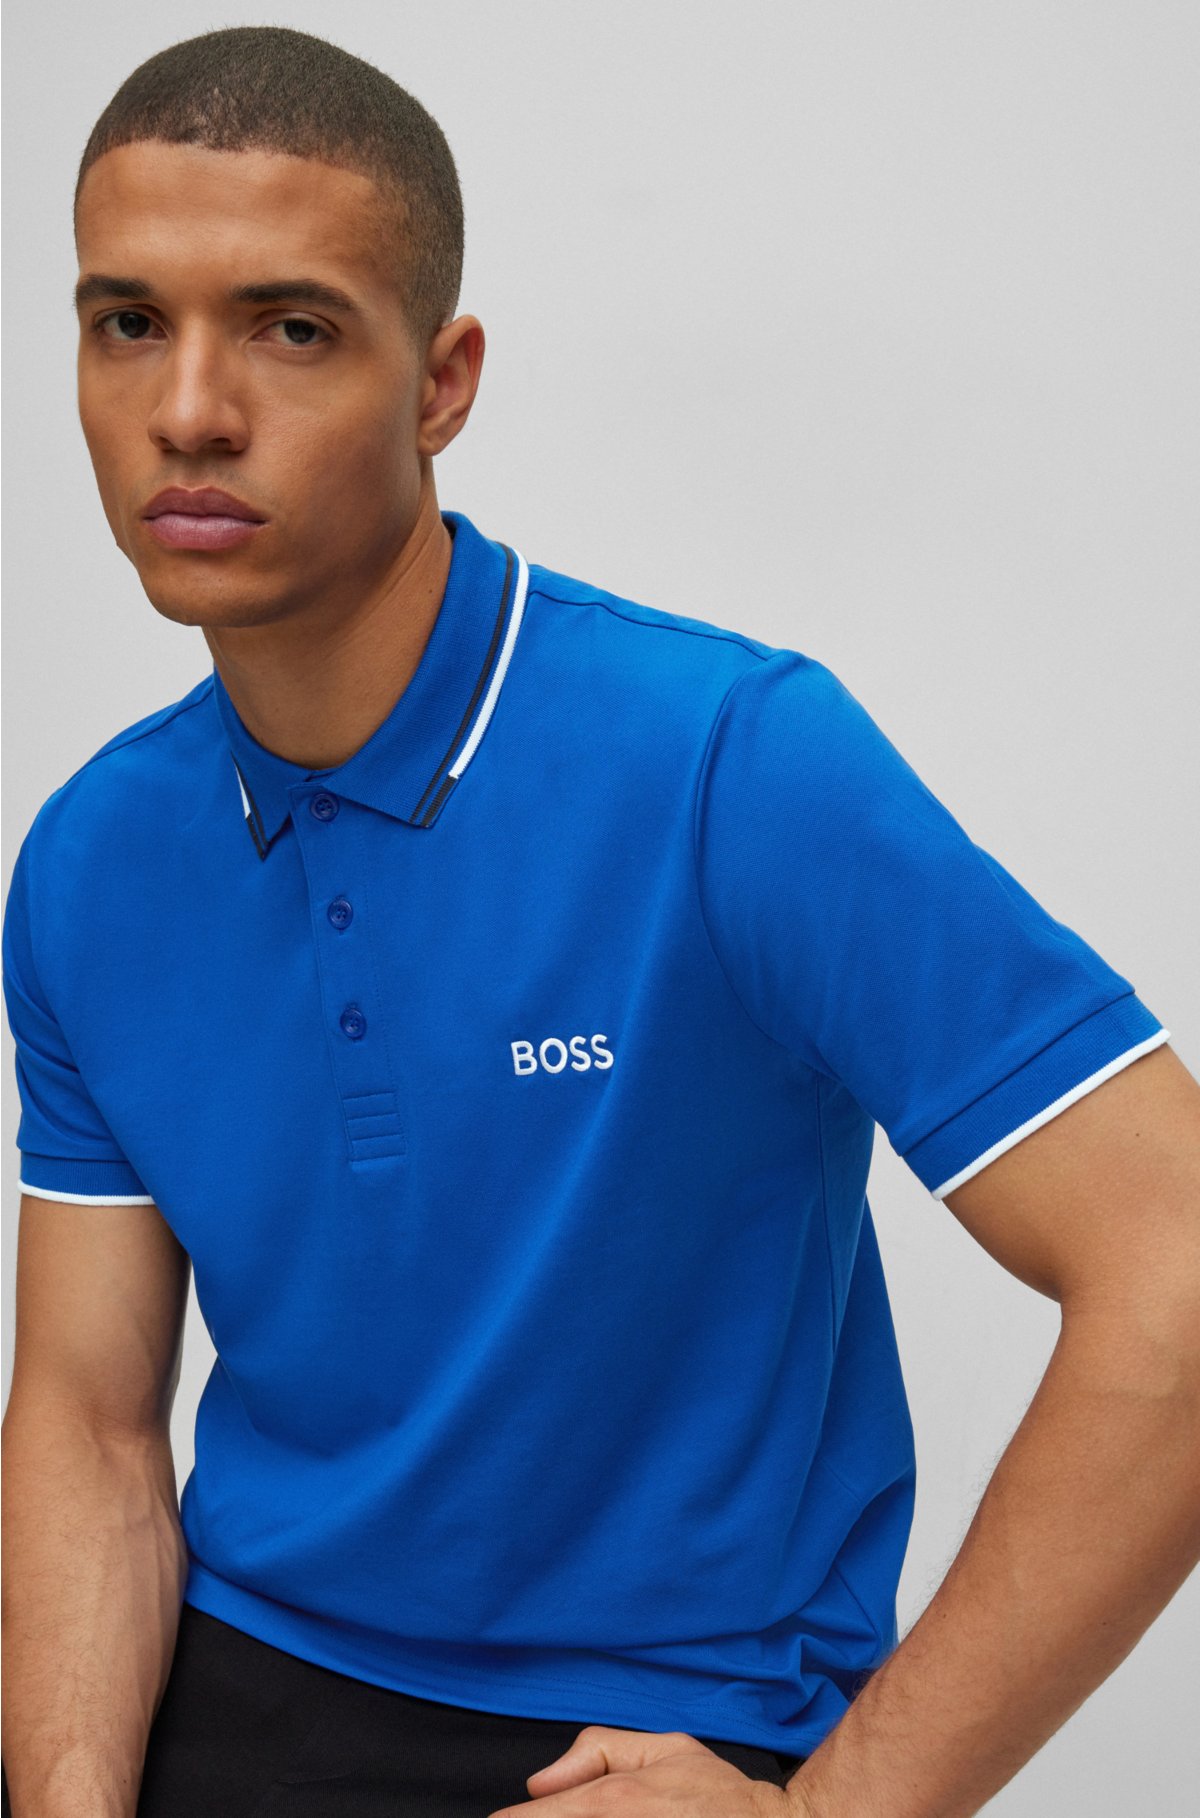 details polo BOSS contrast with Cotton-blend shirt -